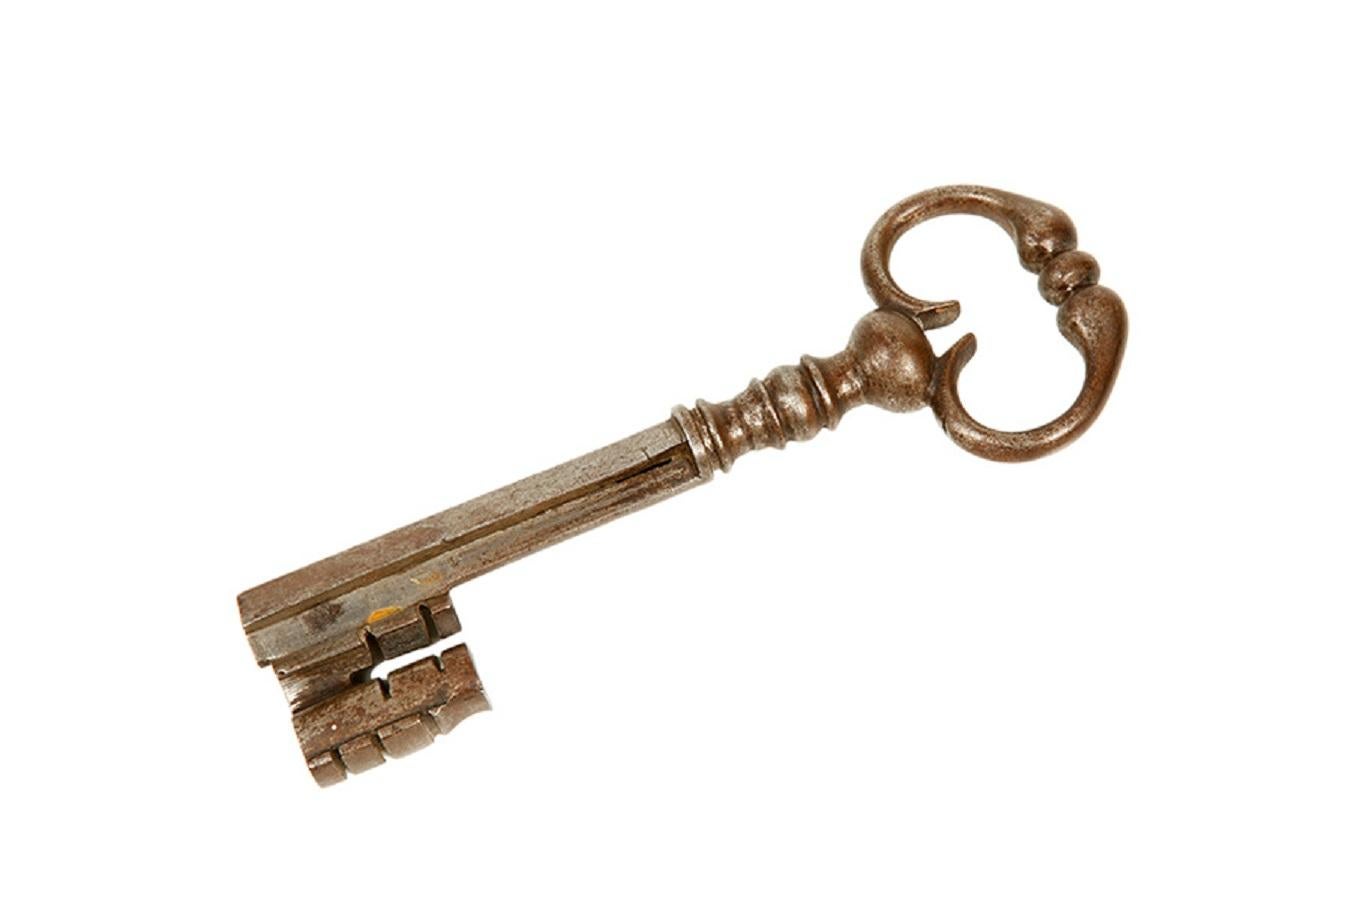 Key of strong box in wrought iron, dated in century XVII, with complex design in the head, hollow body and finishes in the form of flattened arch.